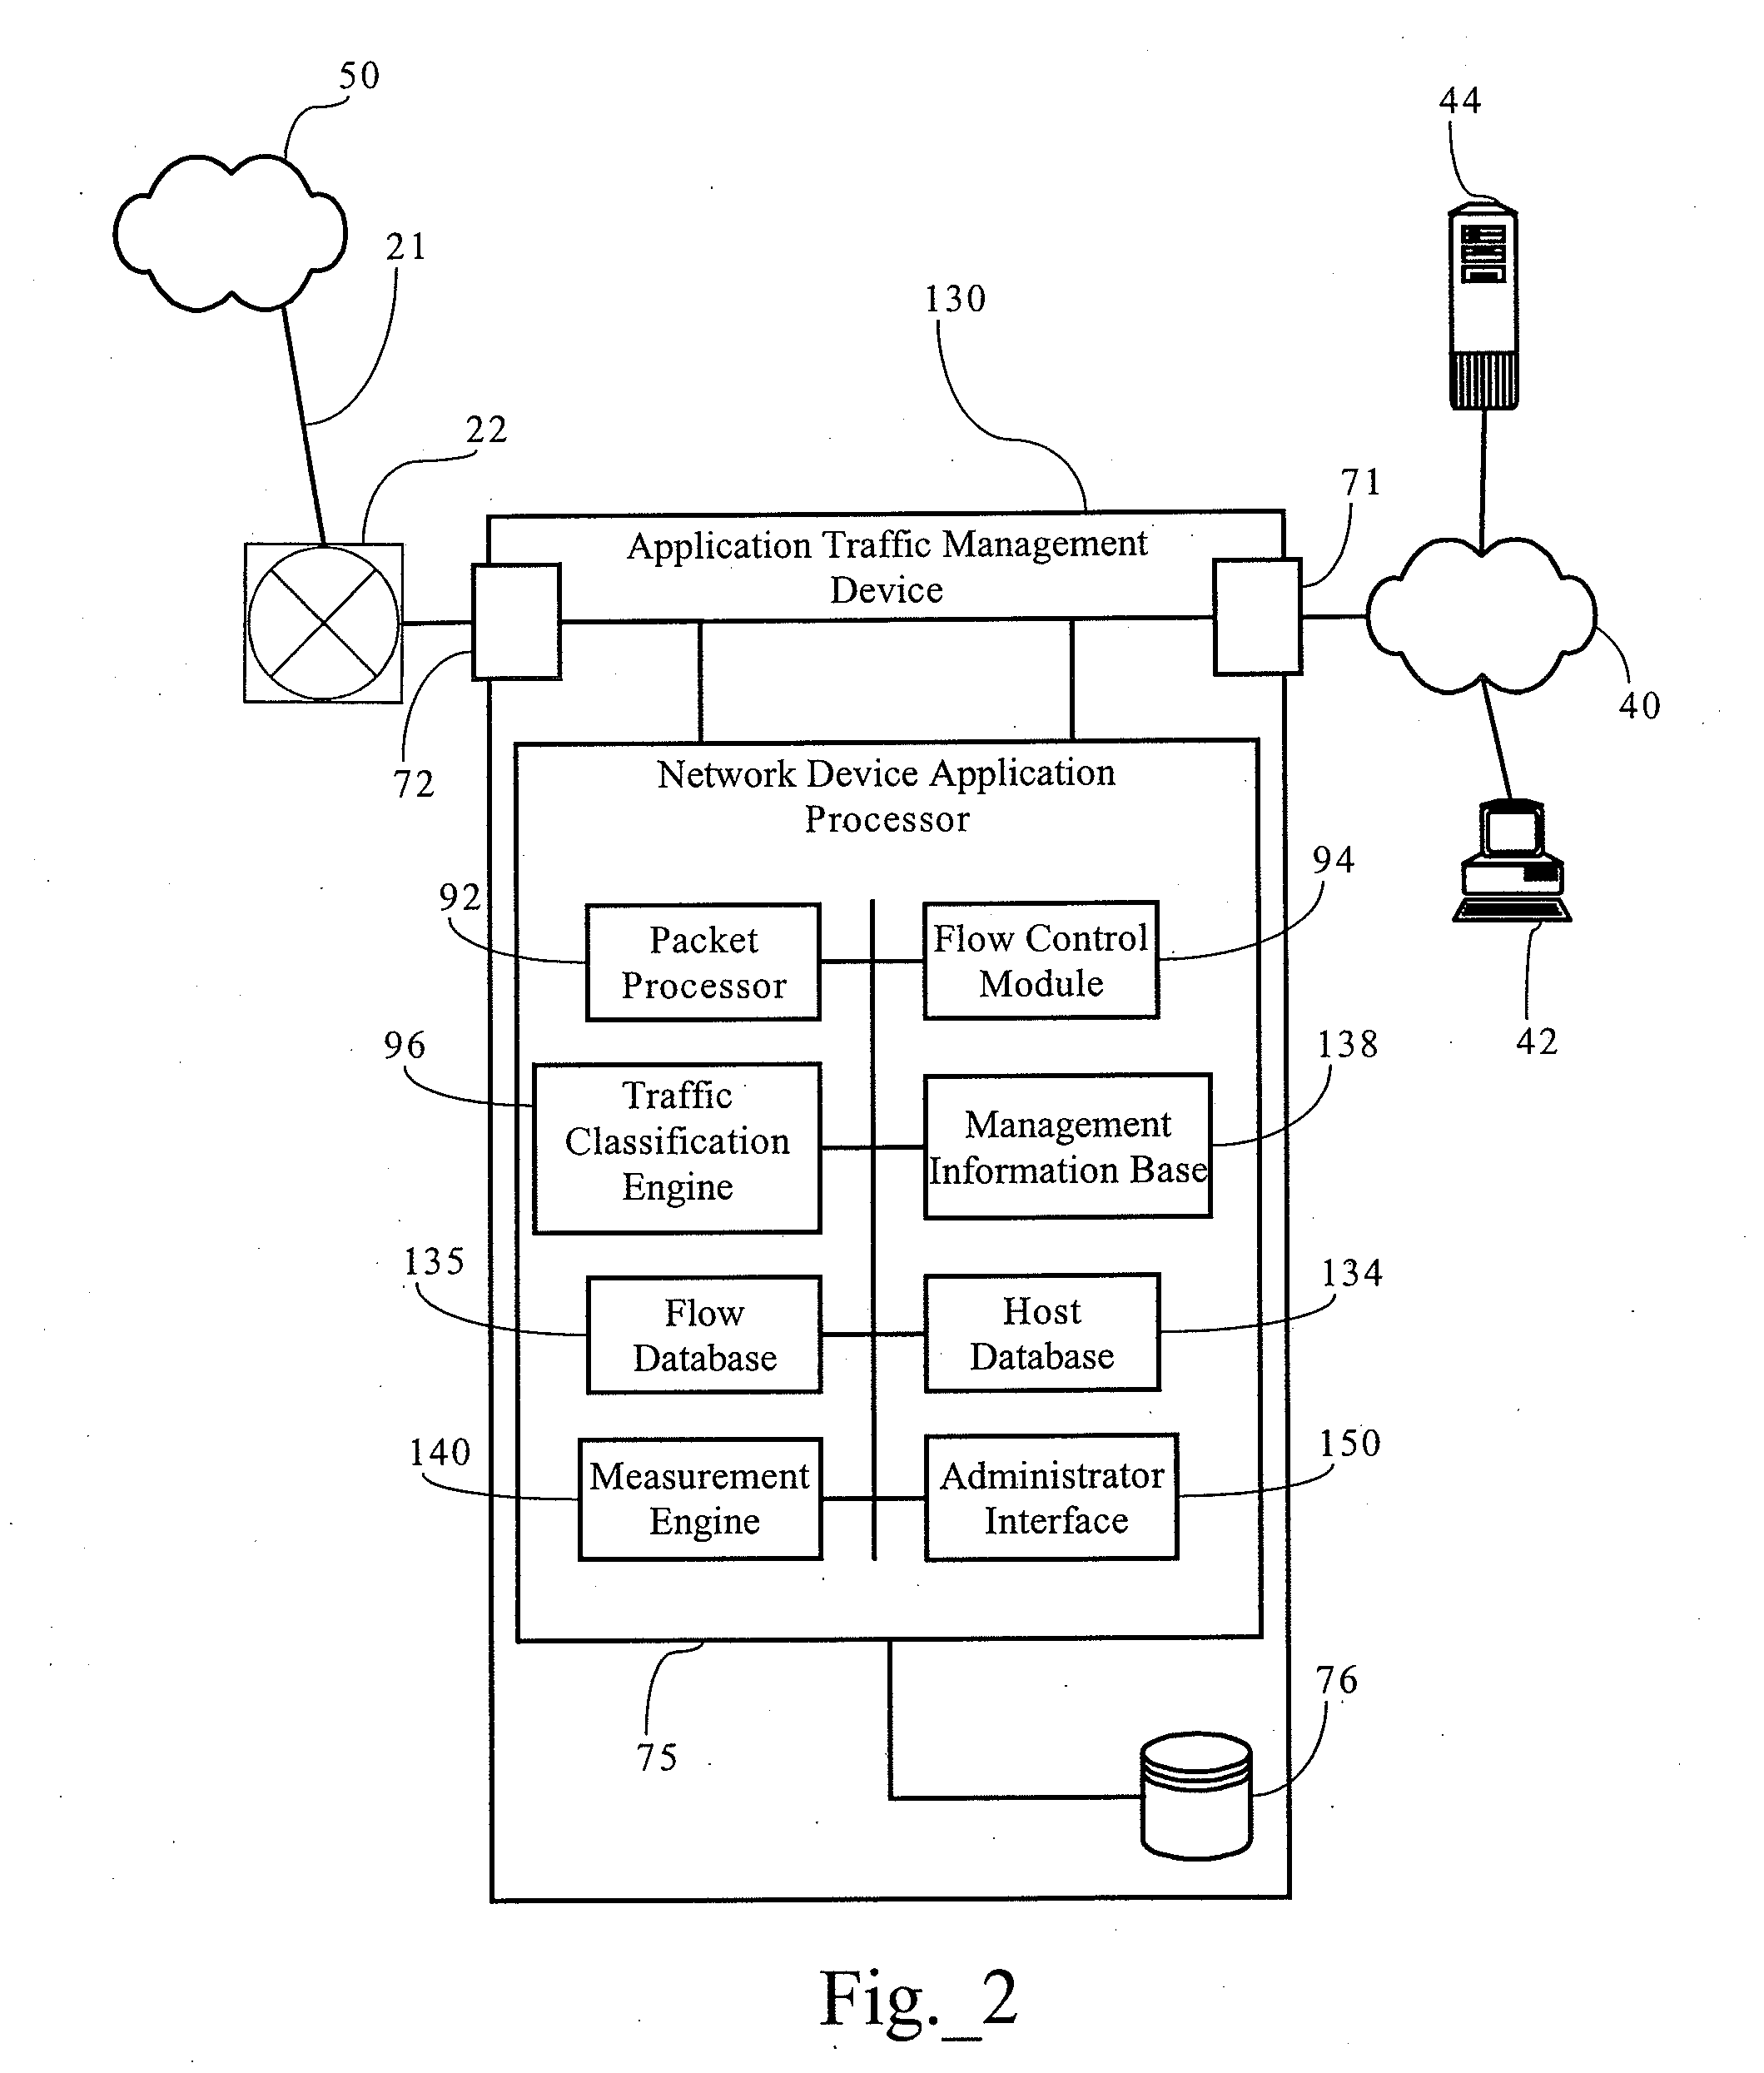 Partition Configuration and Creation Mechanisms for Network Traffic Management Devices